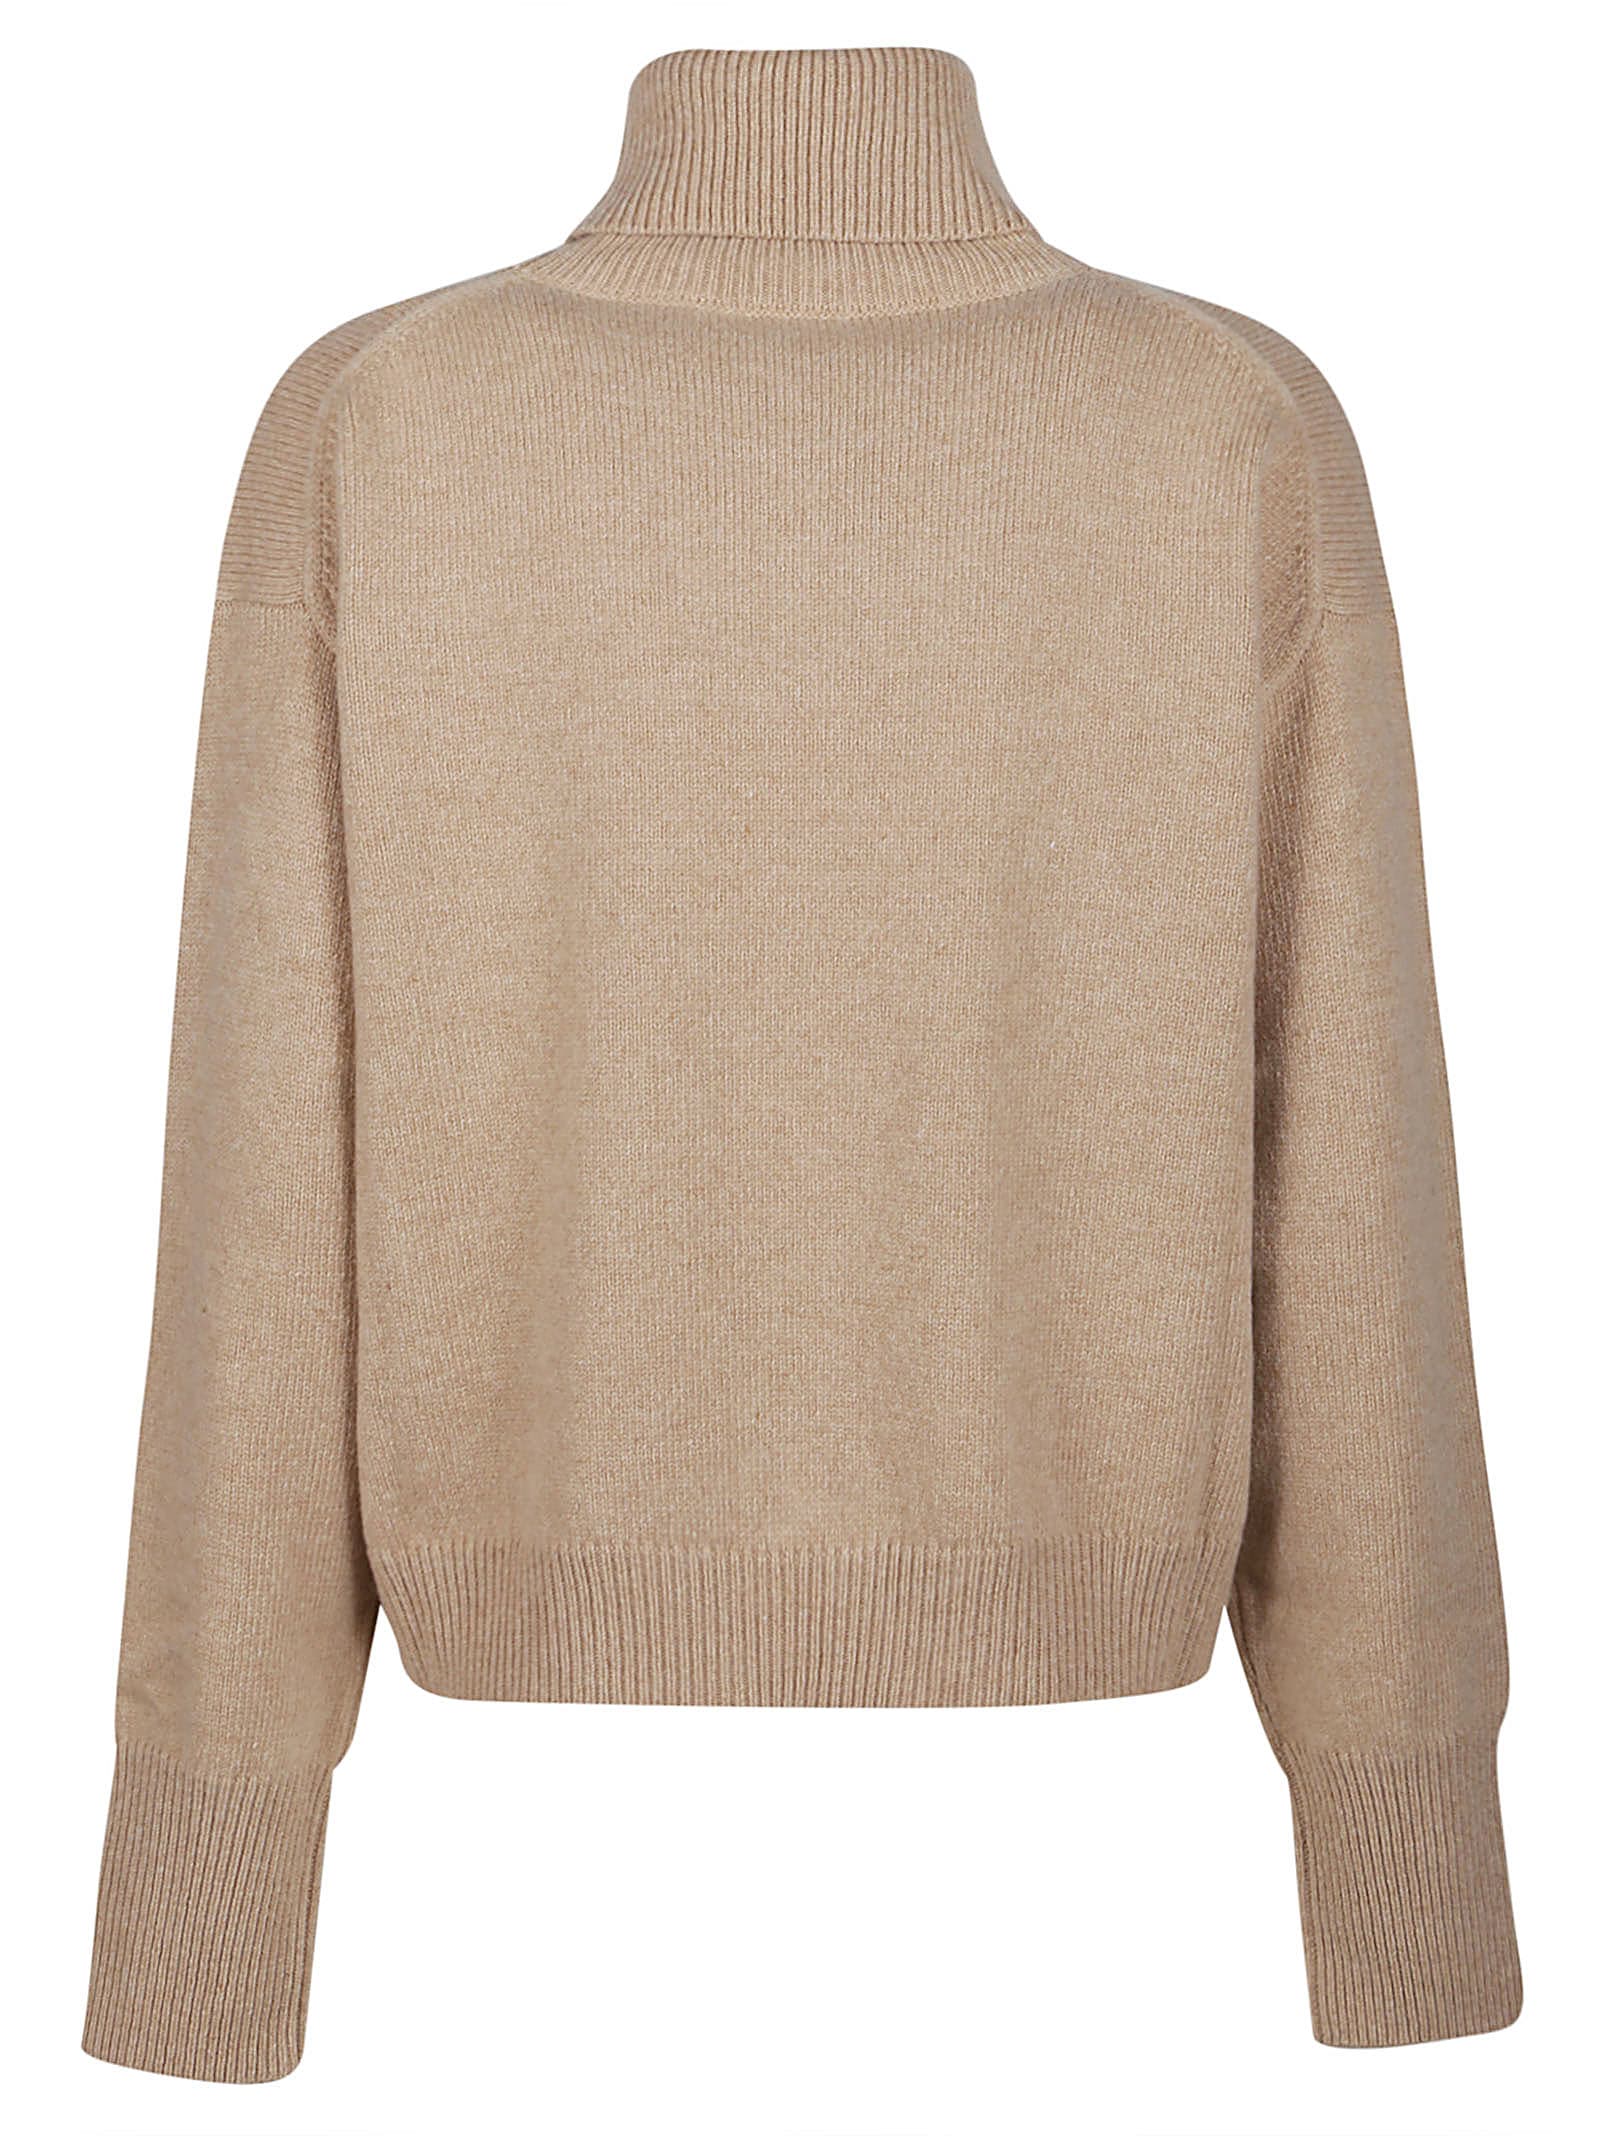 Shop Kenzo Boxy Crest Turtle Neck Sweater In Tabac